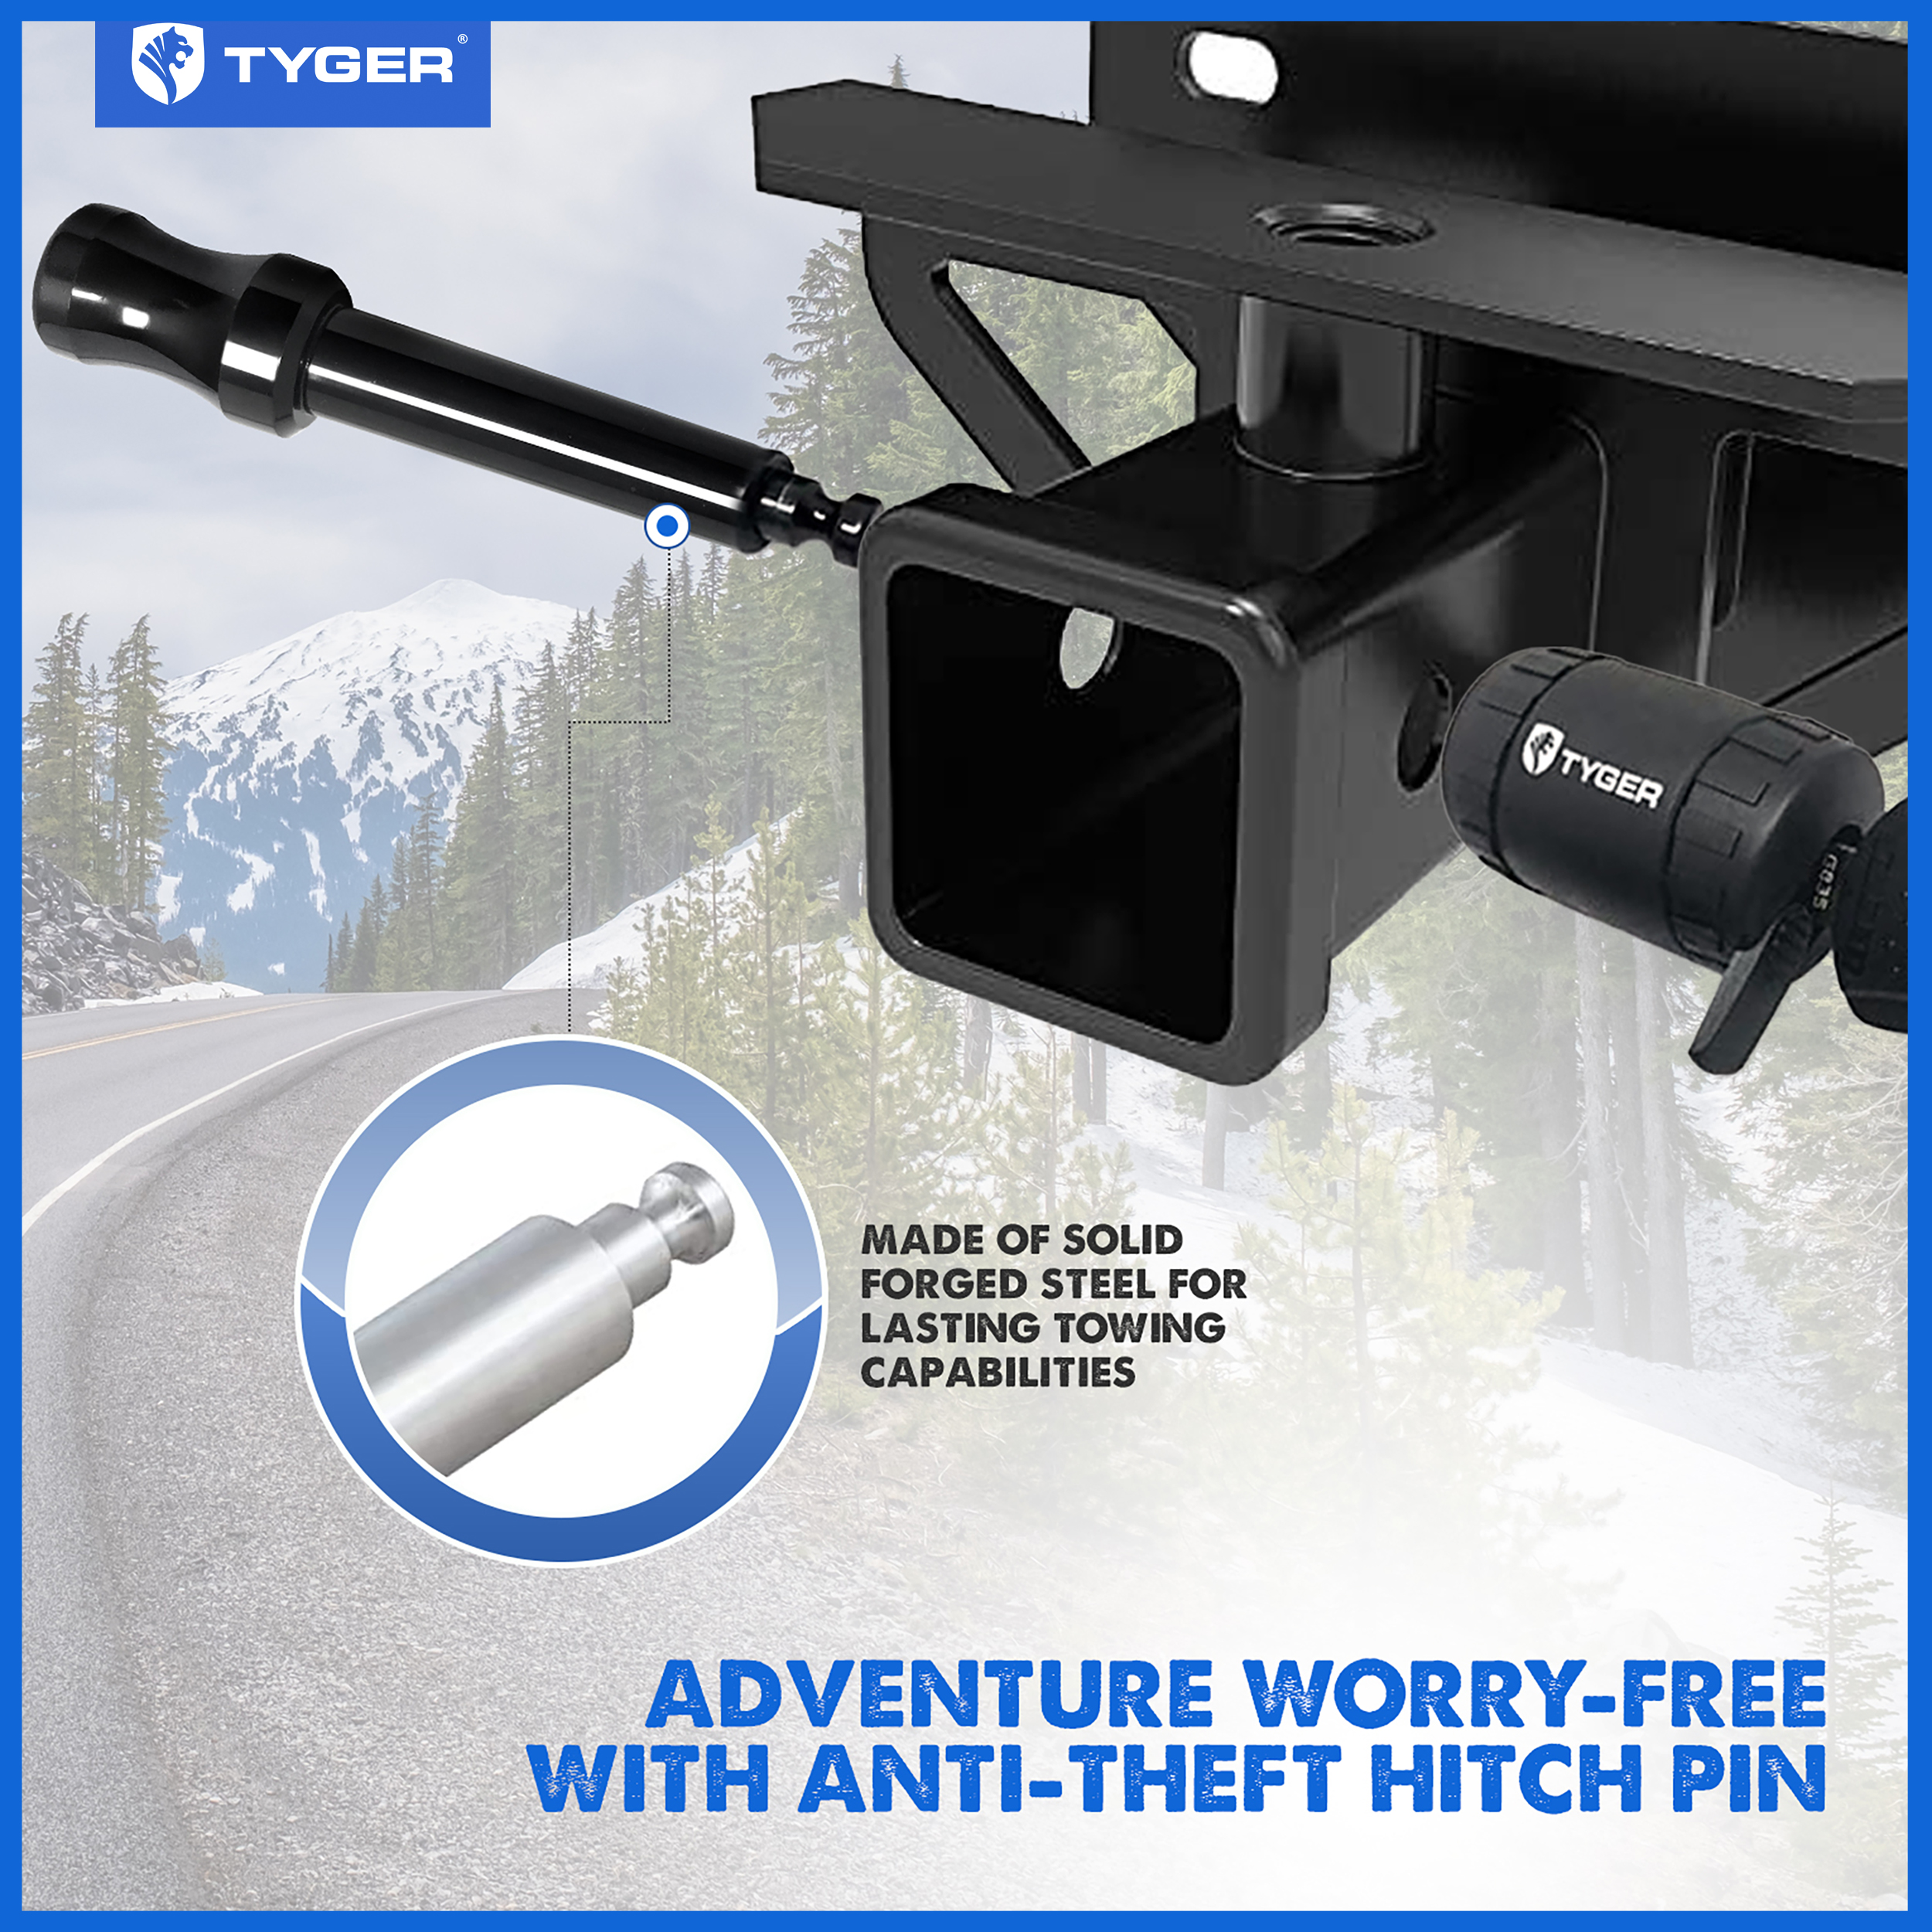 TYGER Solid Trailer Hitch Lock Pin with Locking Key - Fit 5/8